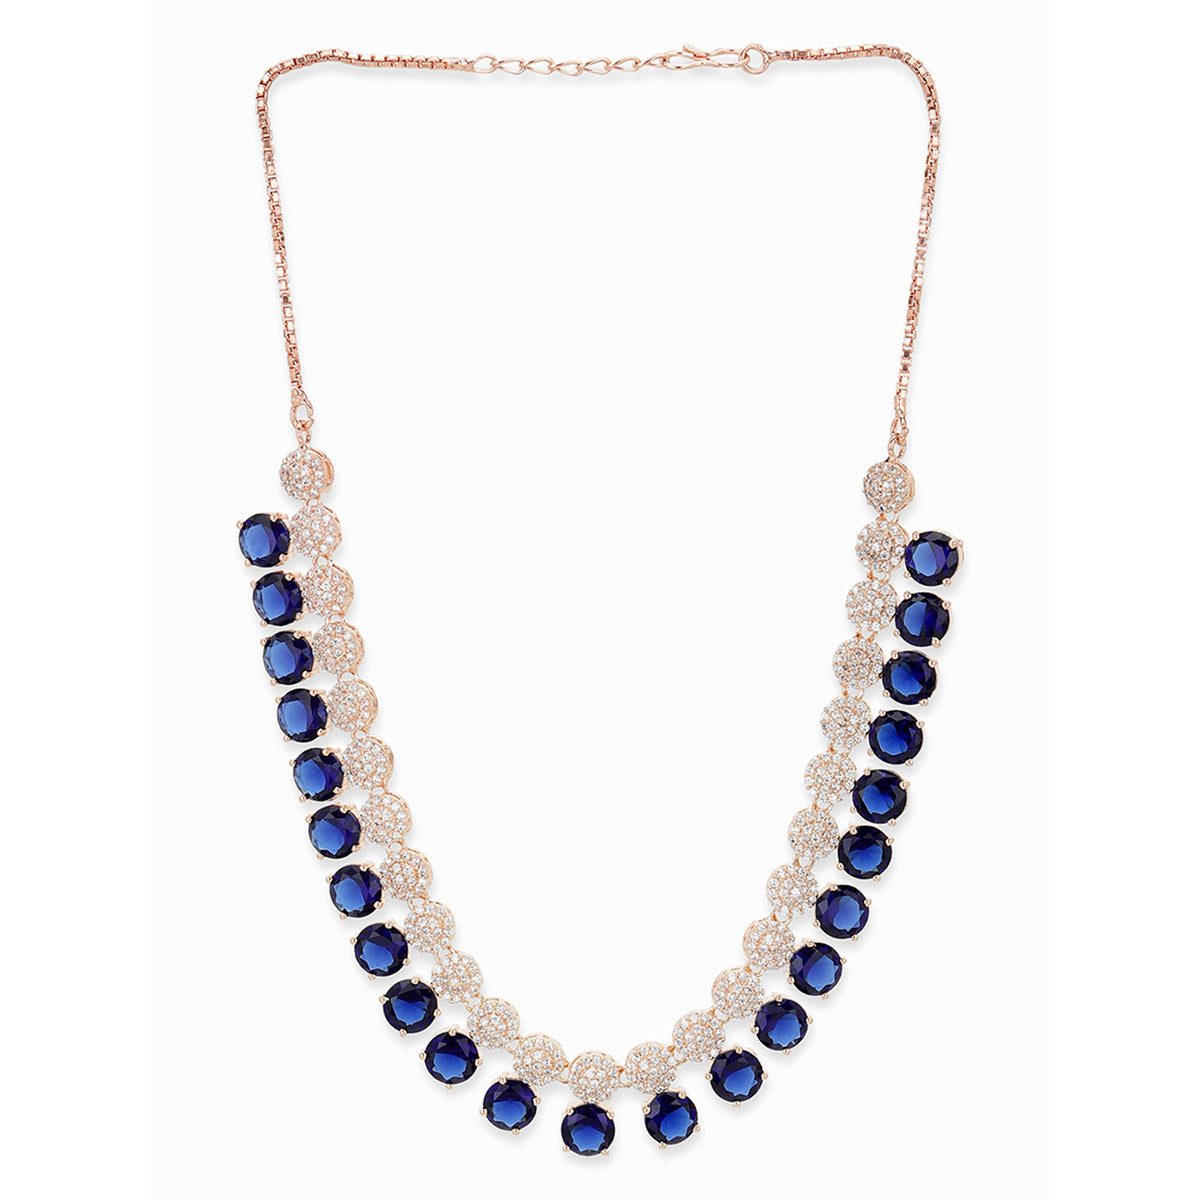 Pink and Dark blue Beaded Necklace | Handmade by Afsheen